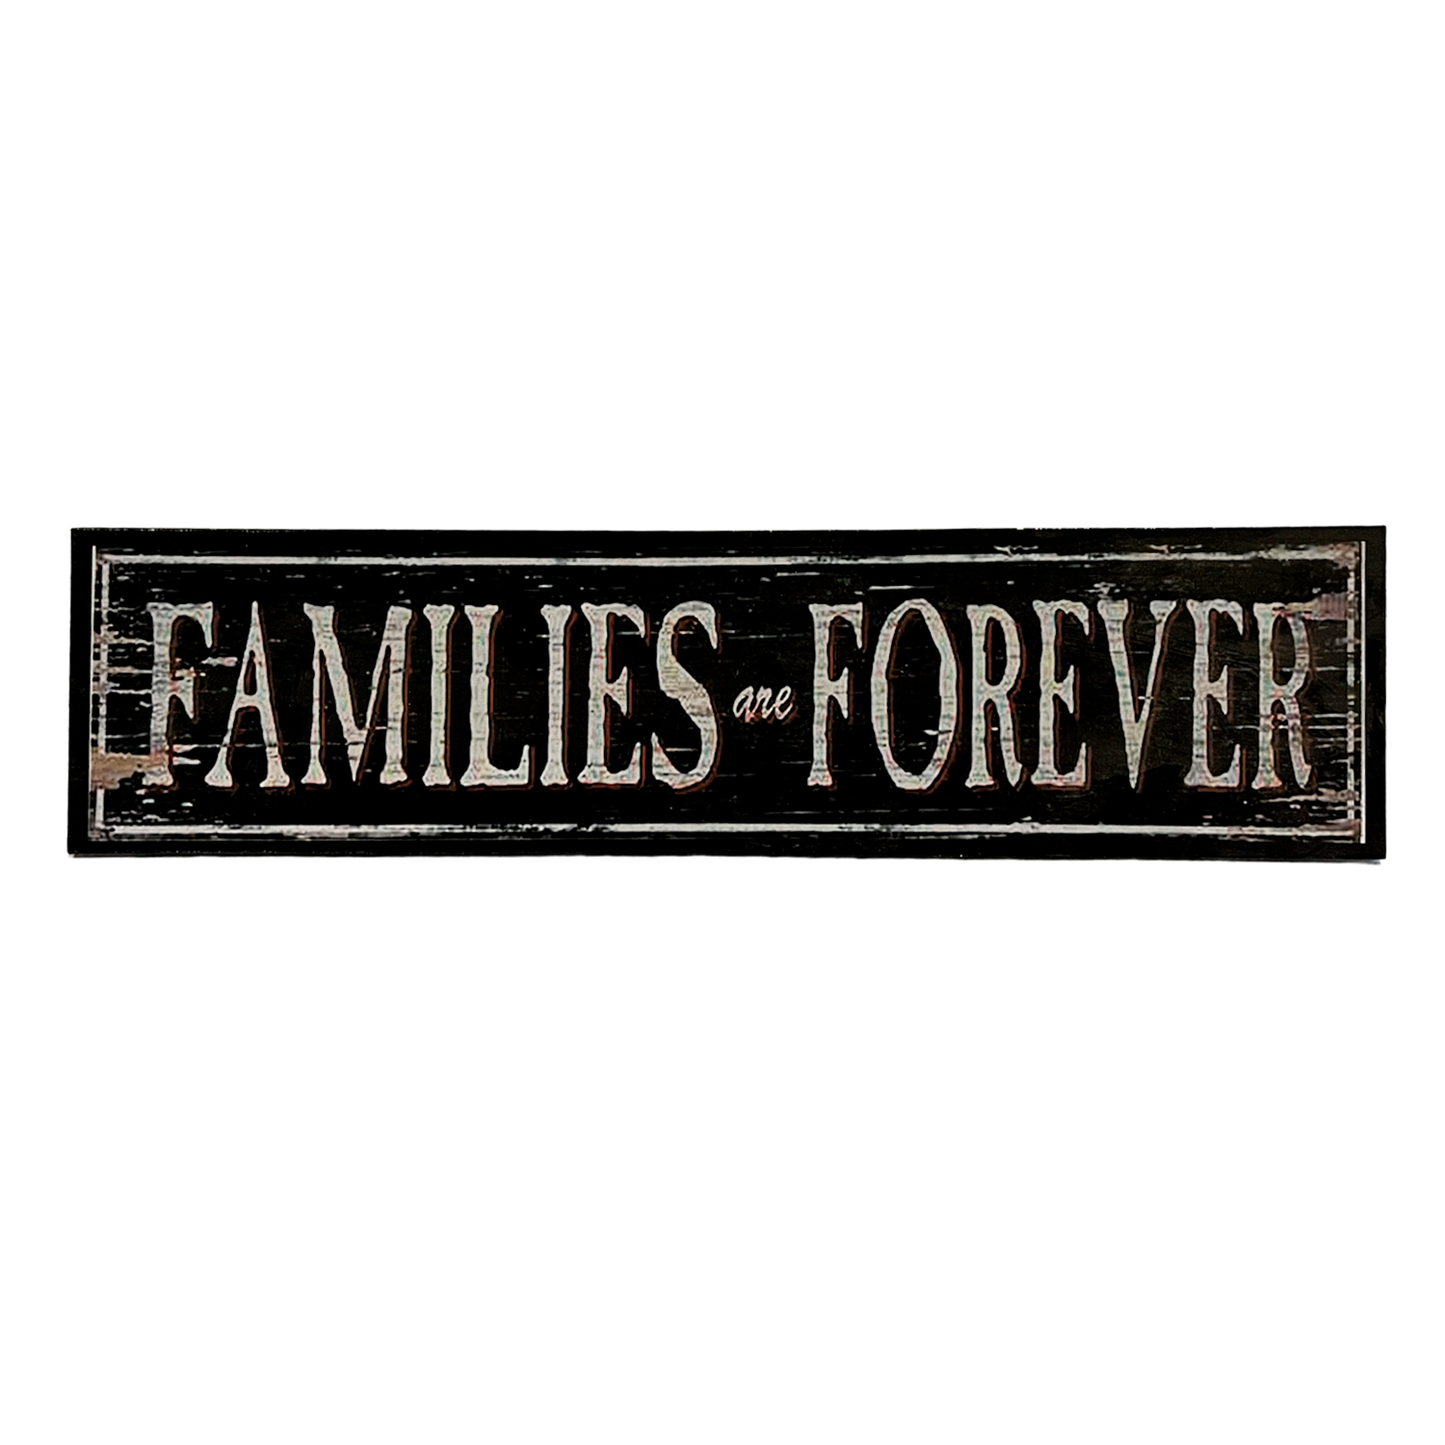 Afiche "Families are forever"